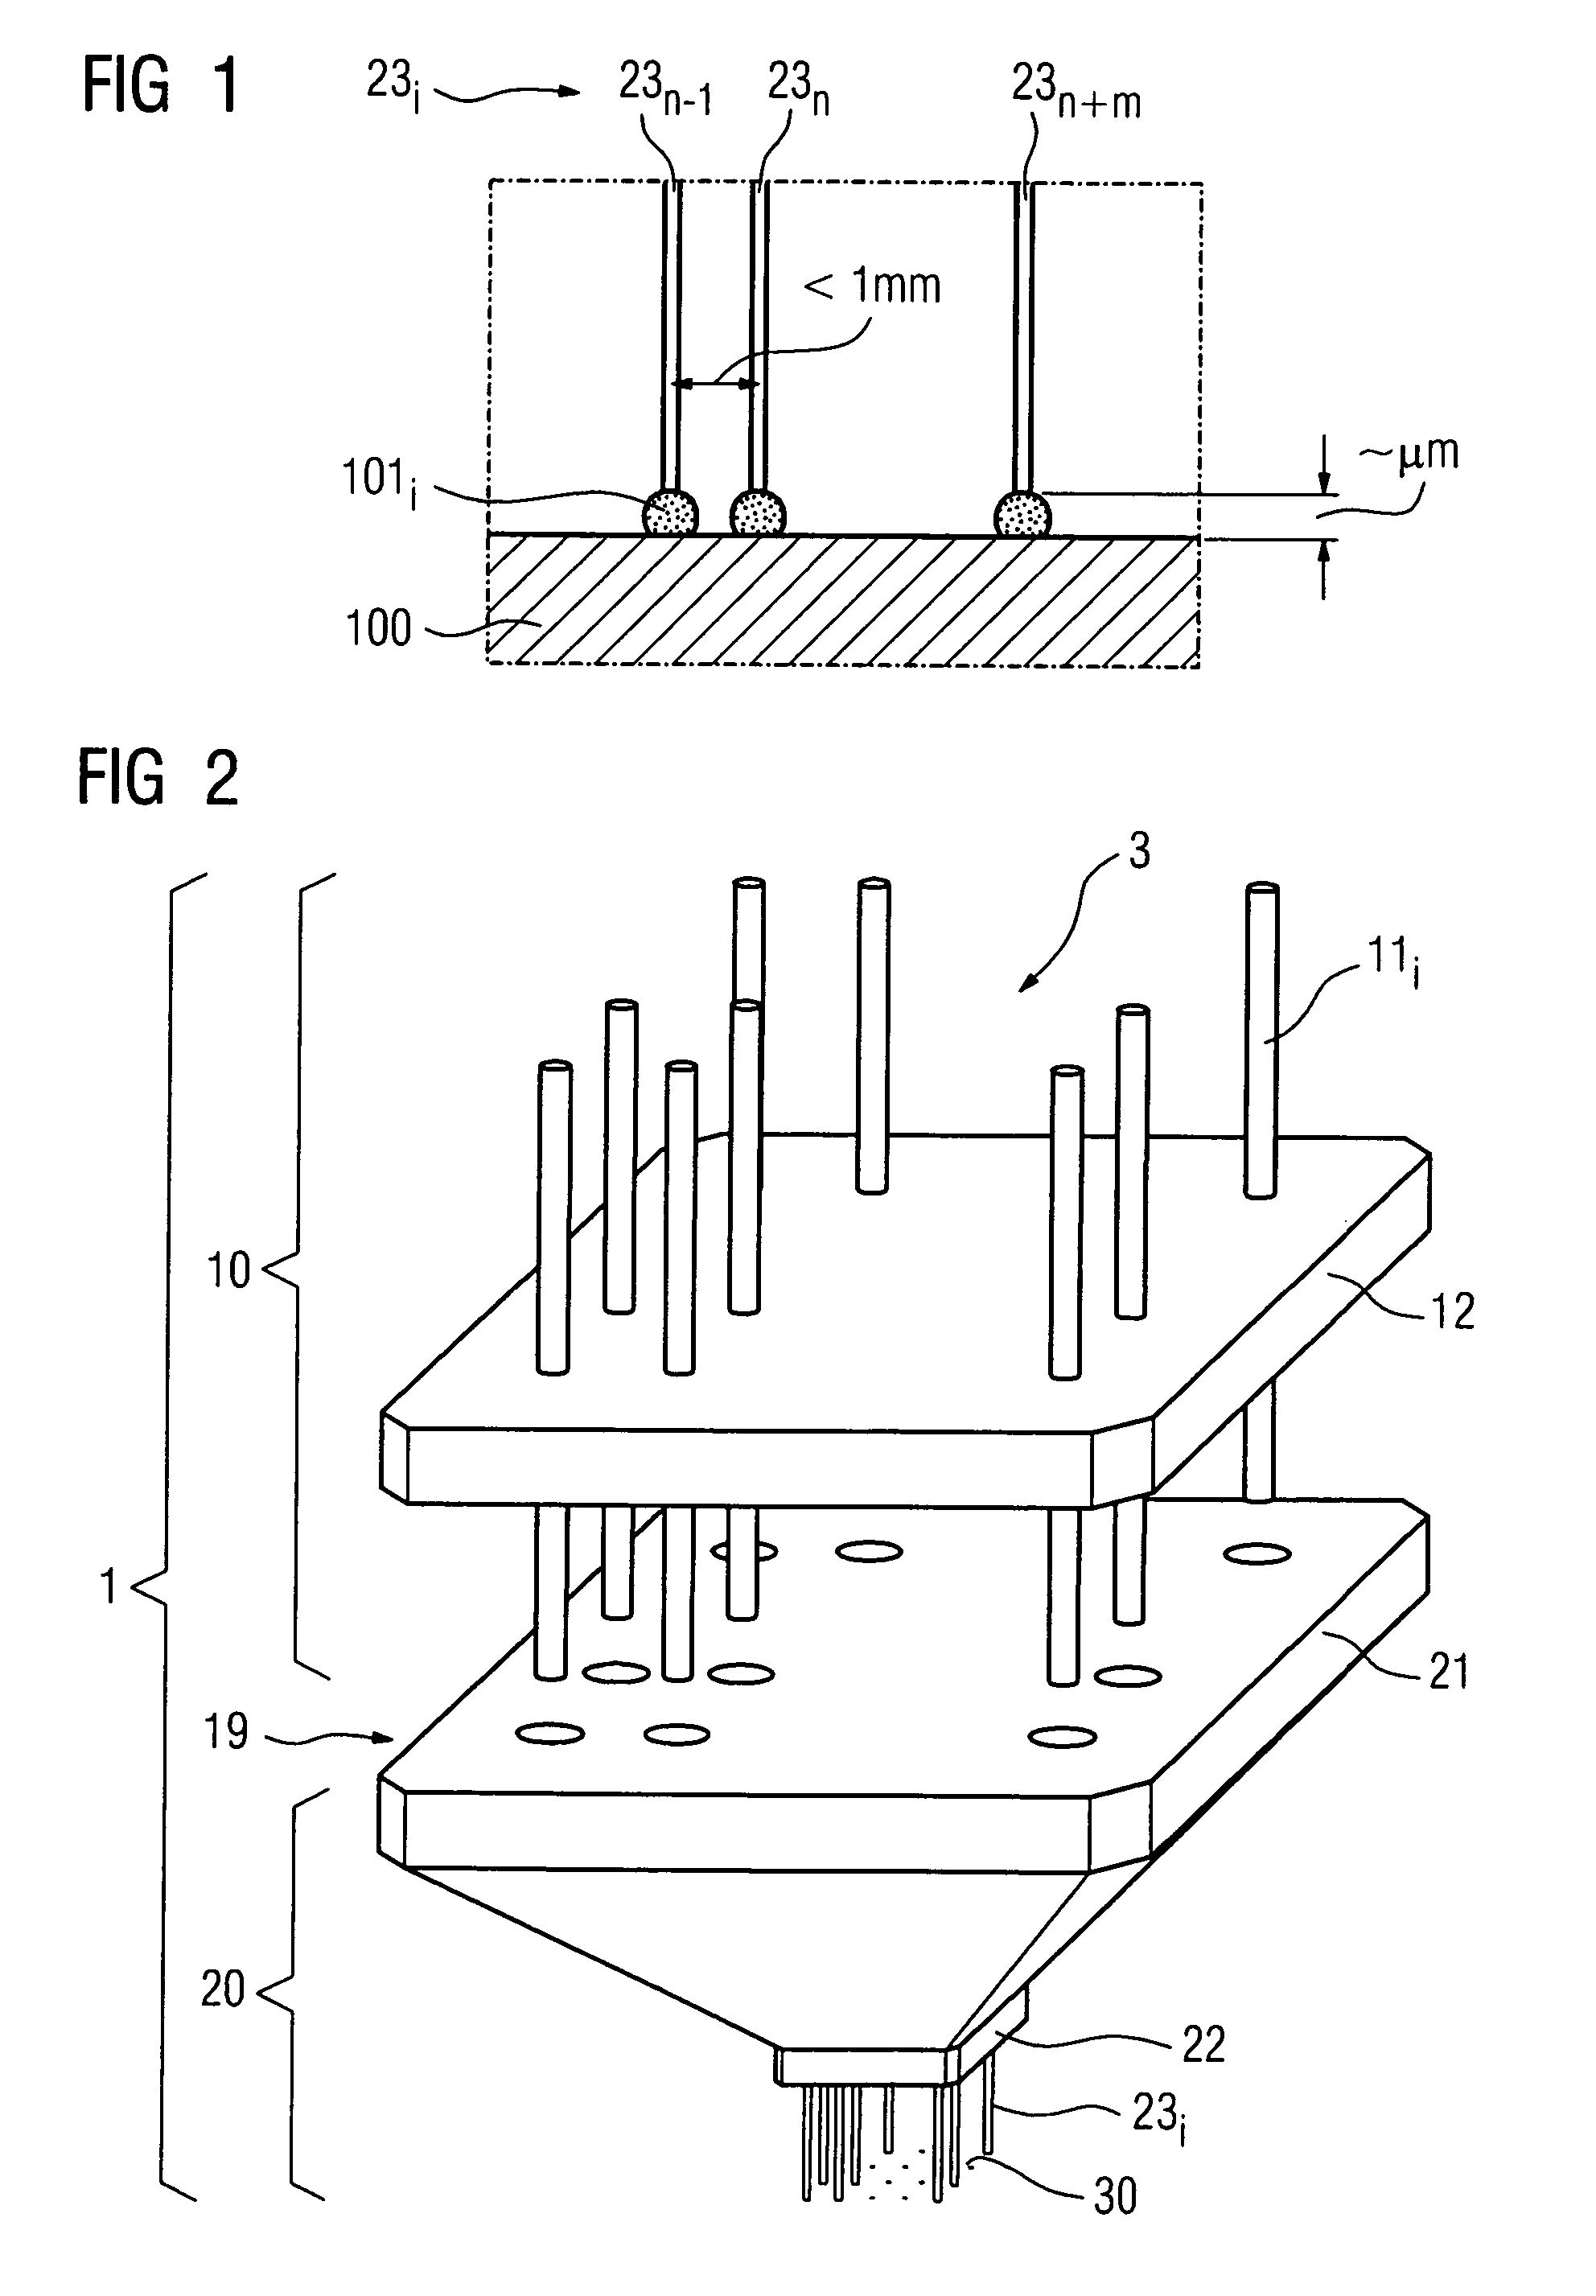 Method and apparatus for dispensing liquids in a micro-grid pattern